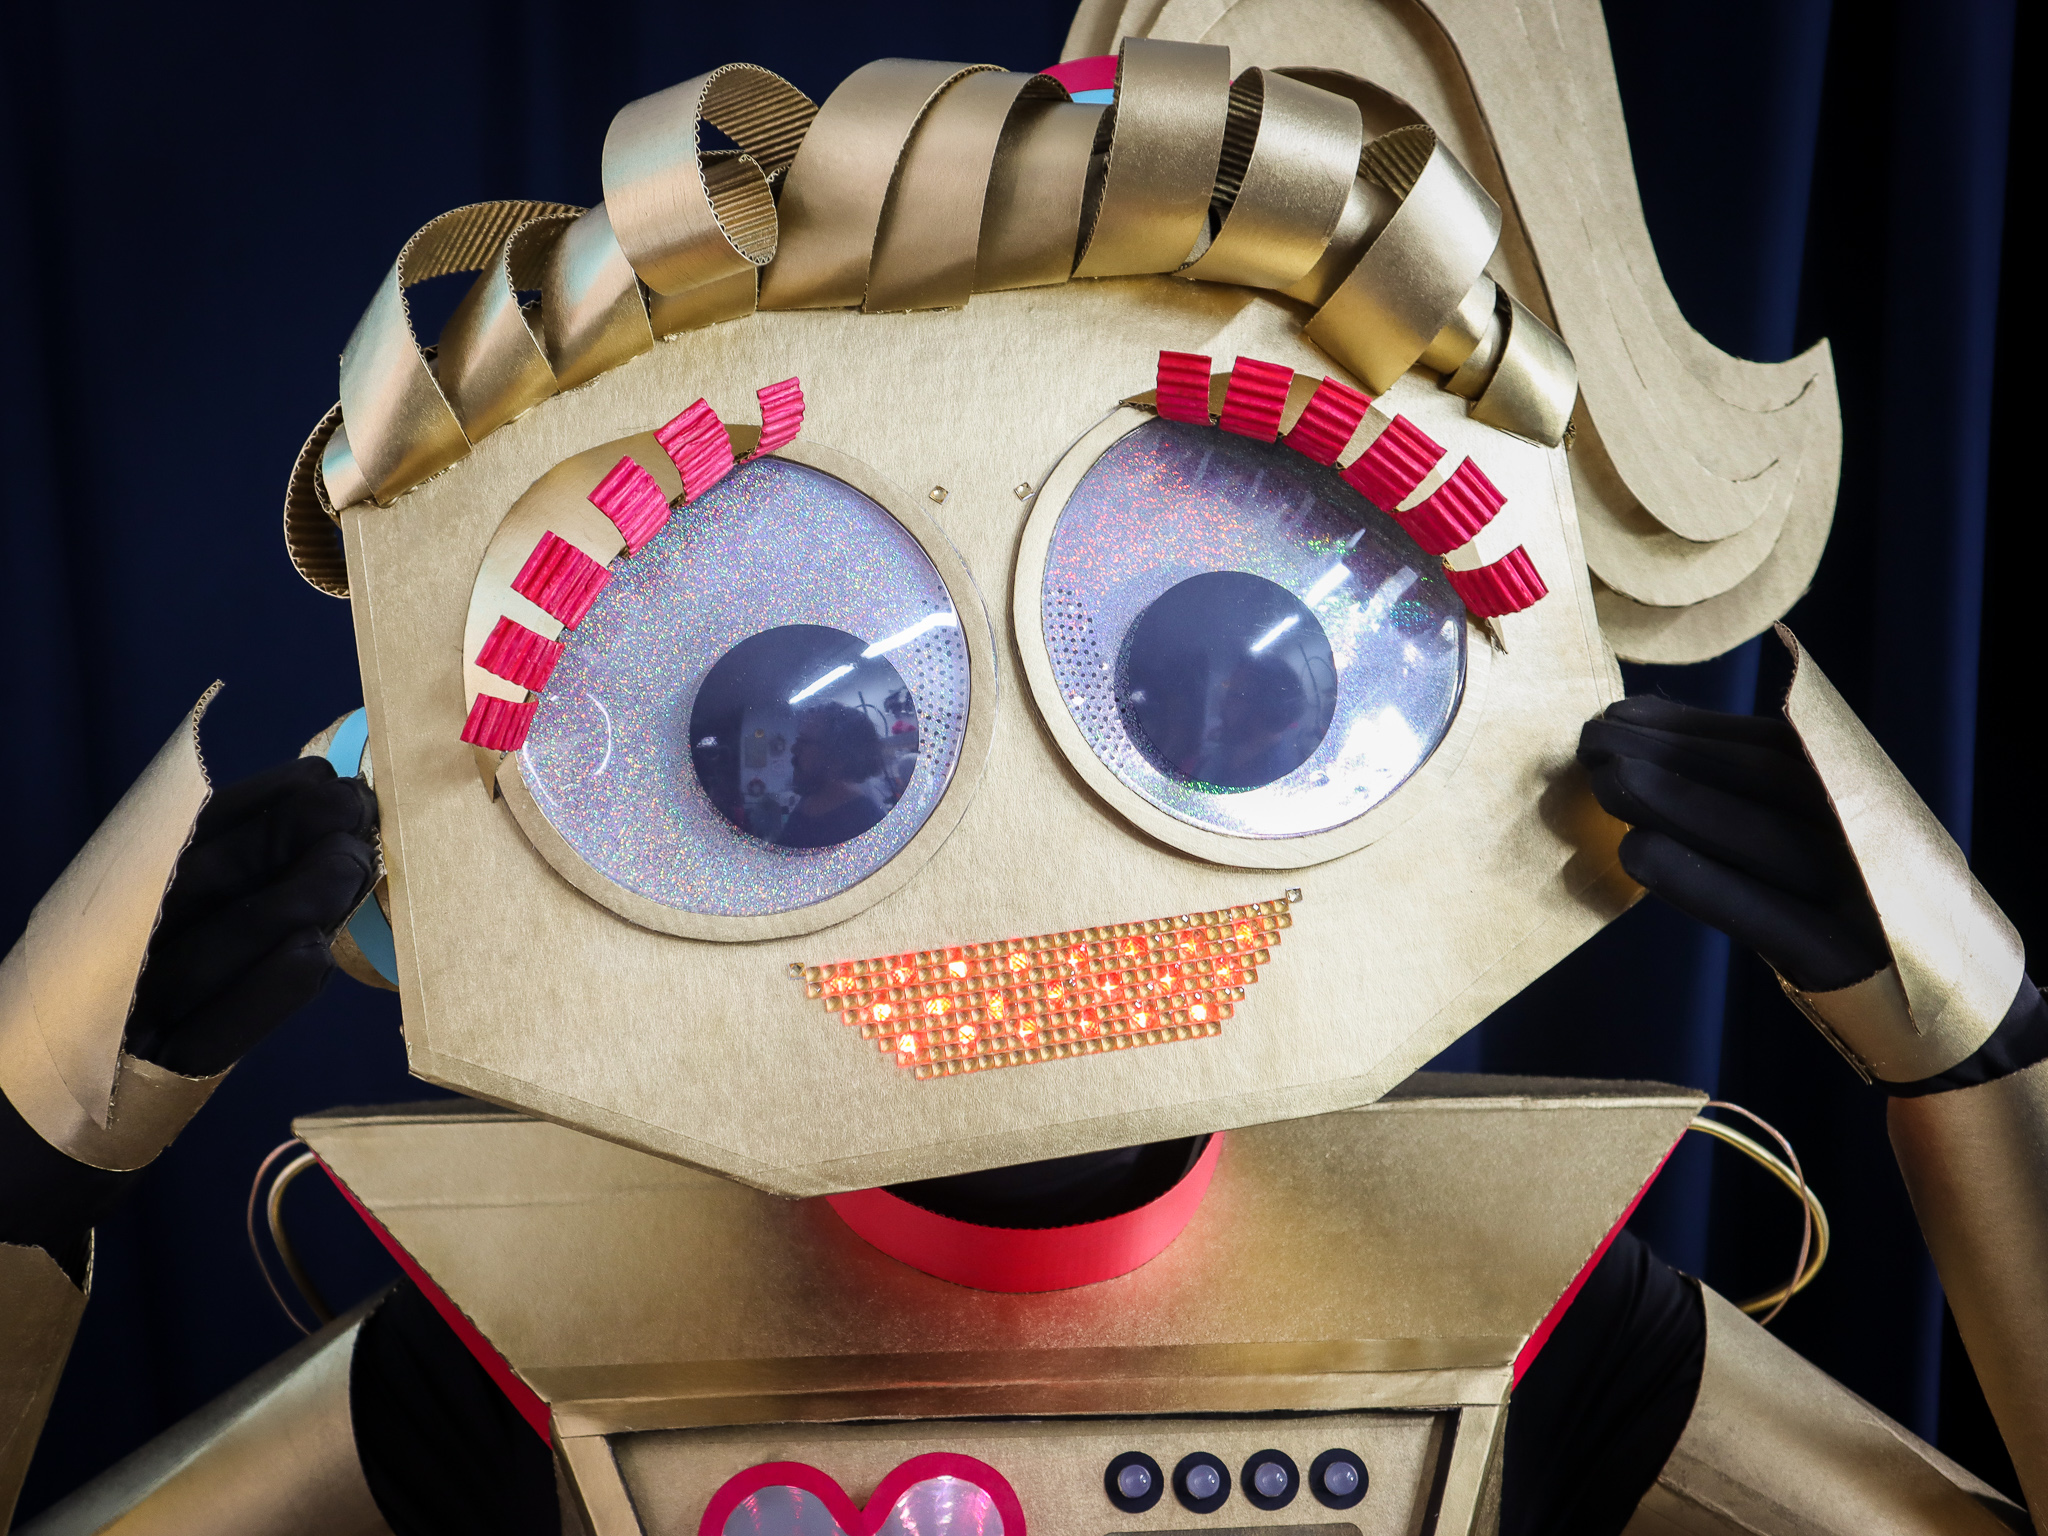 Learn To Make A Cardboard Robot Costume, Infused With Awesome Tech